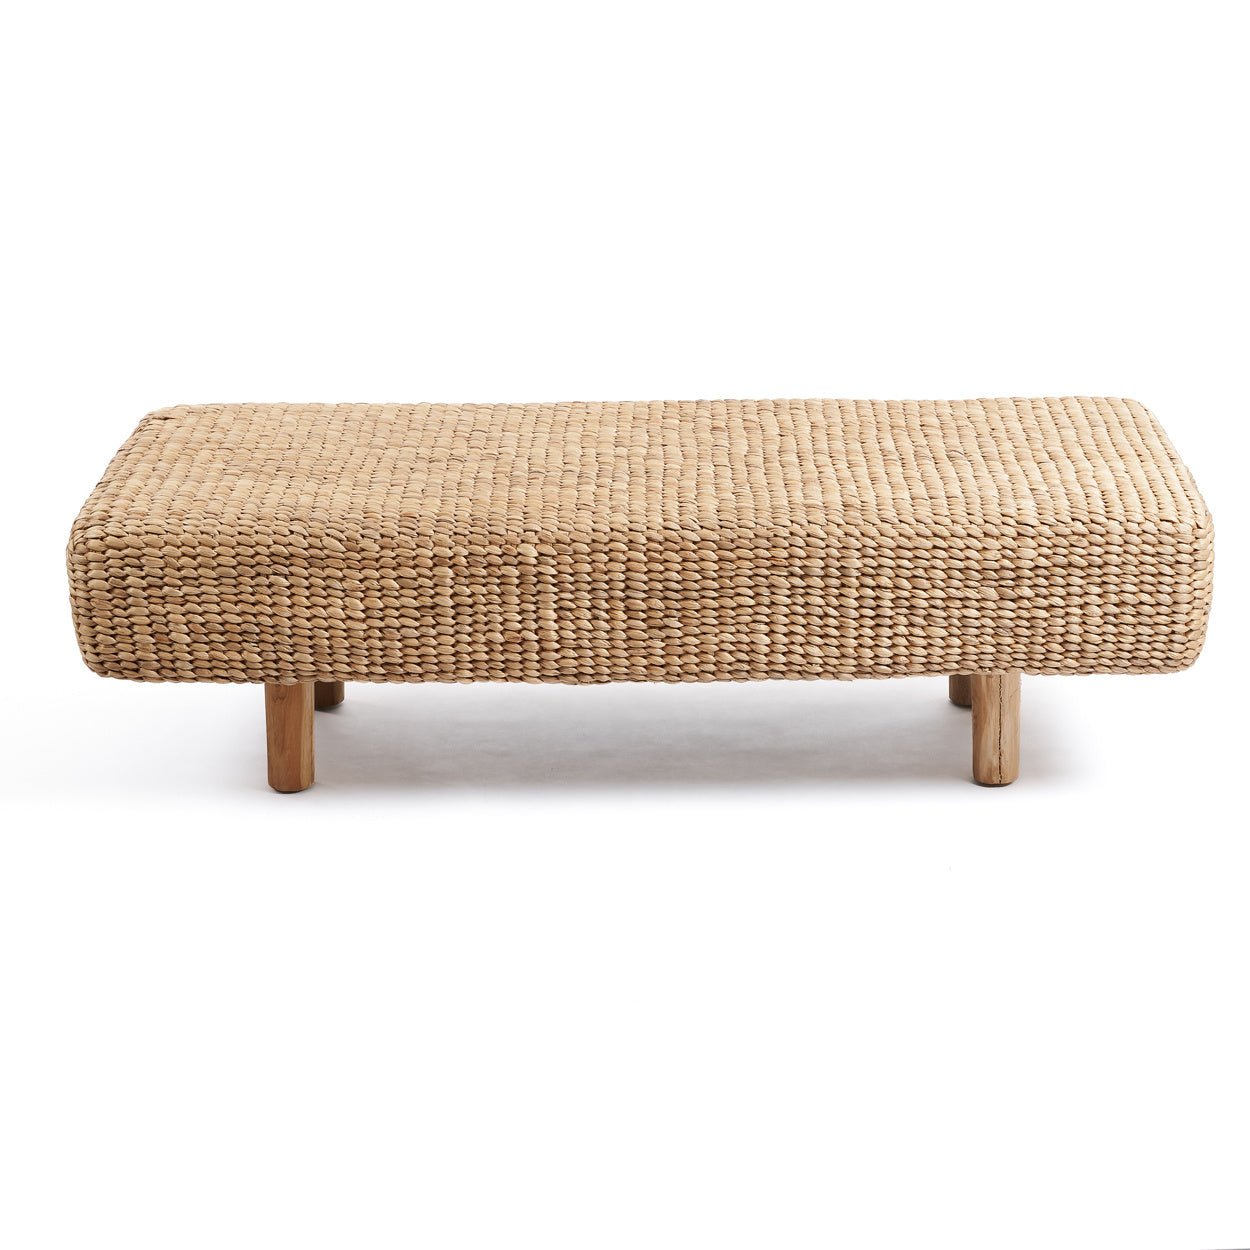 The Water Hyacinth Bench